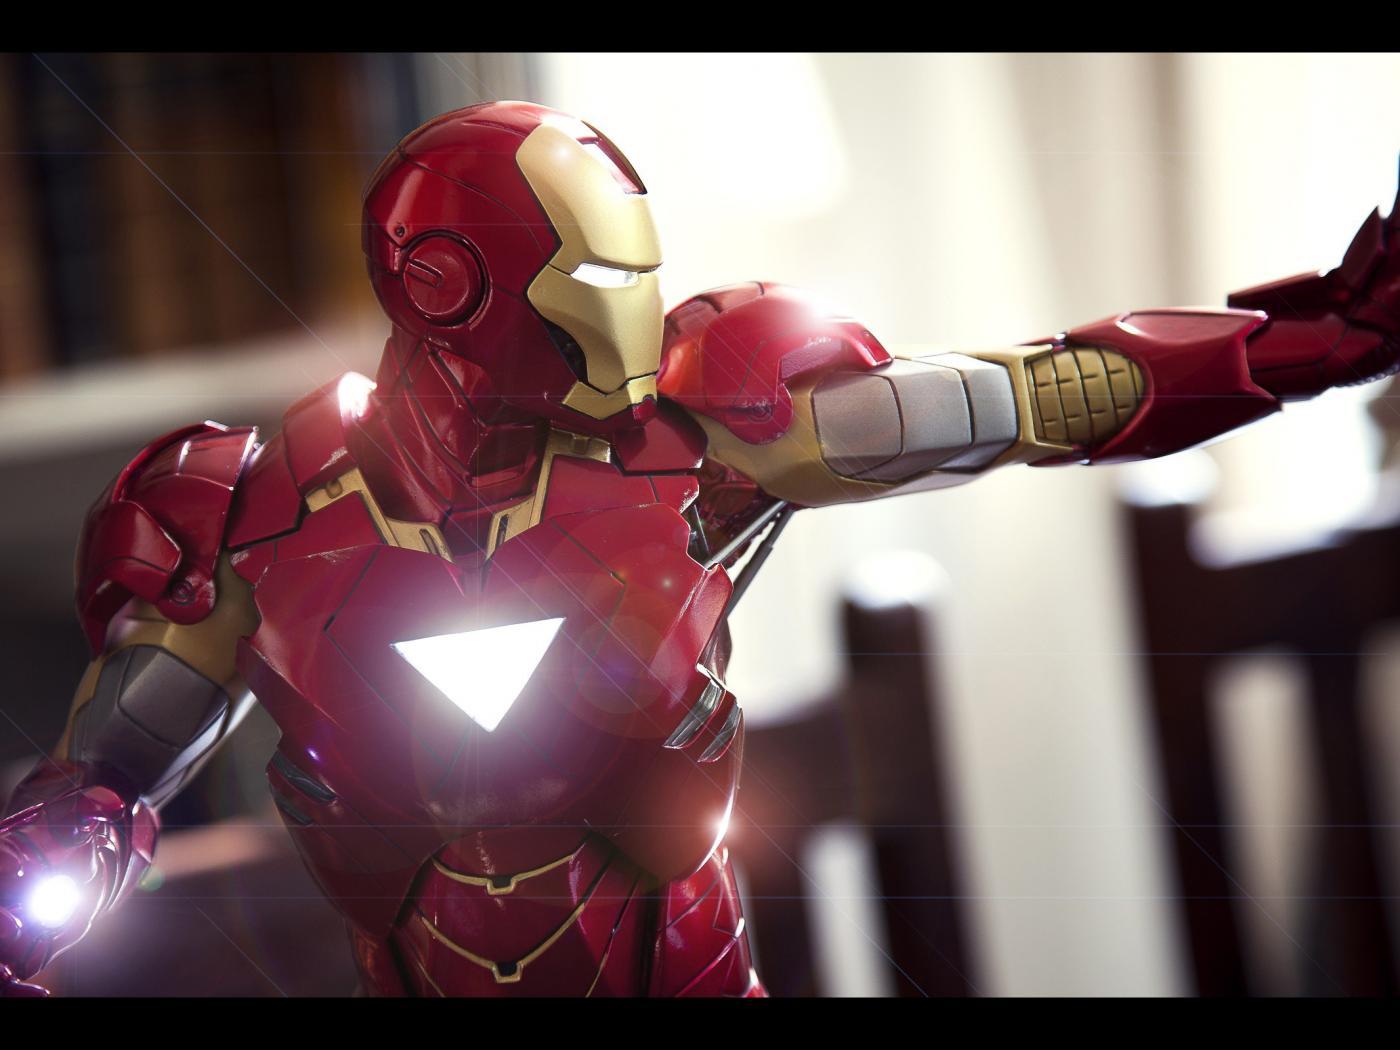 Cool Wallpaper Of Iron Man In Close Up Wearing New Suit